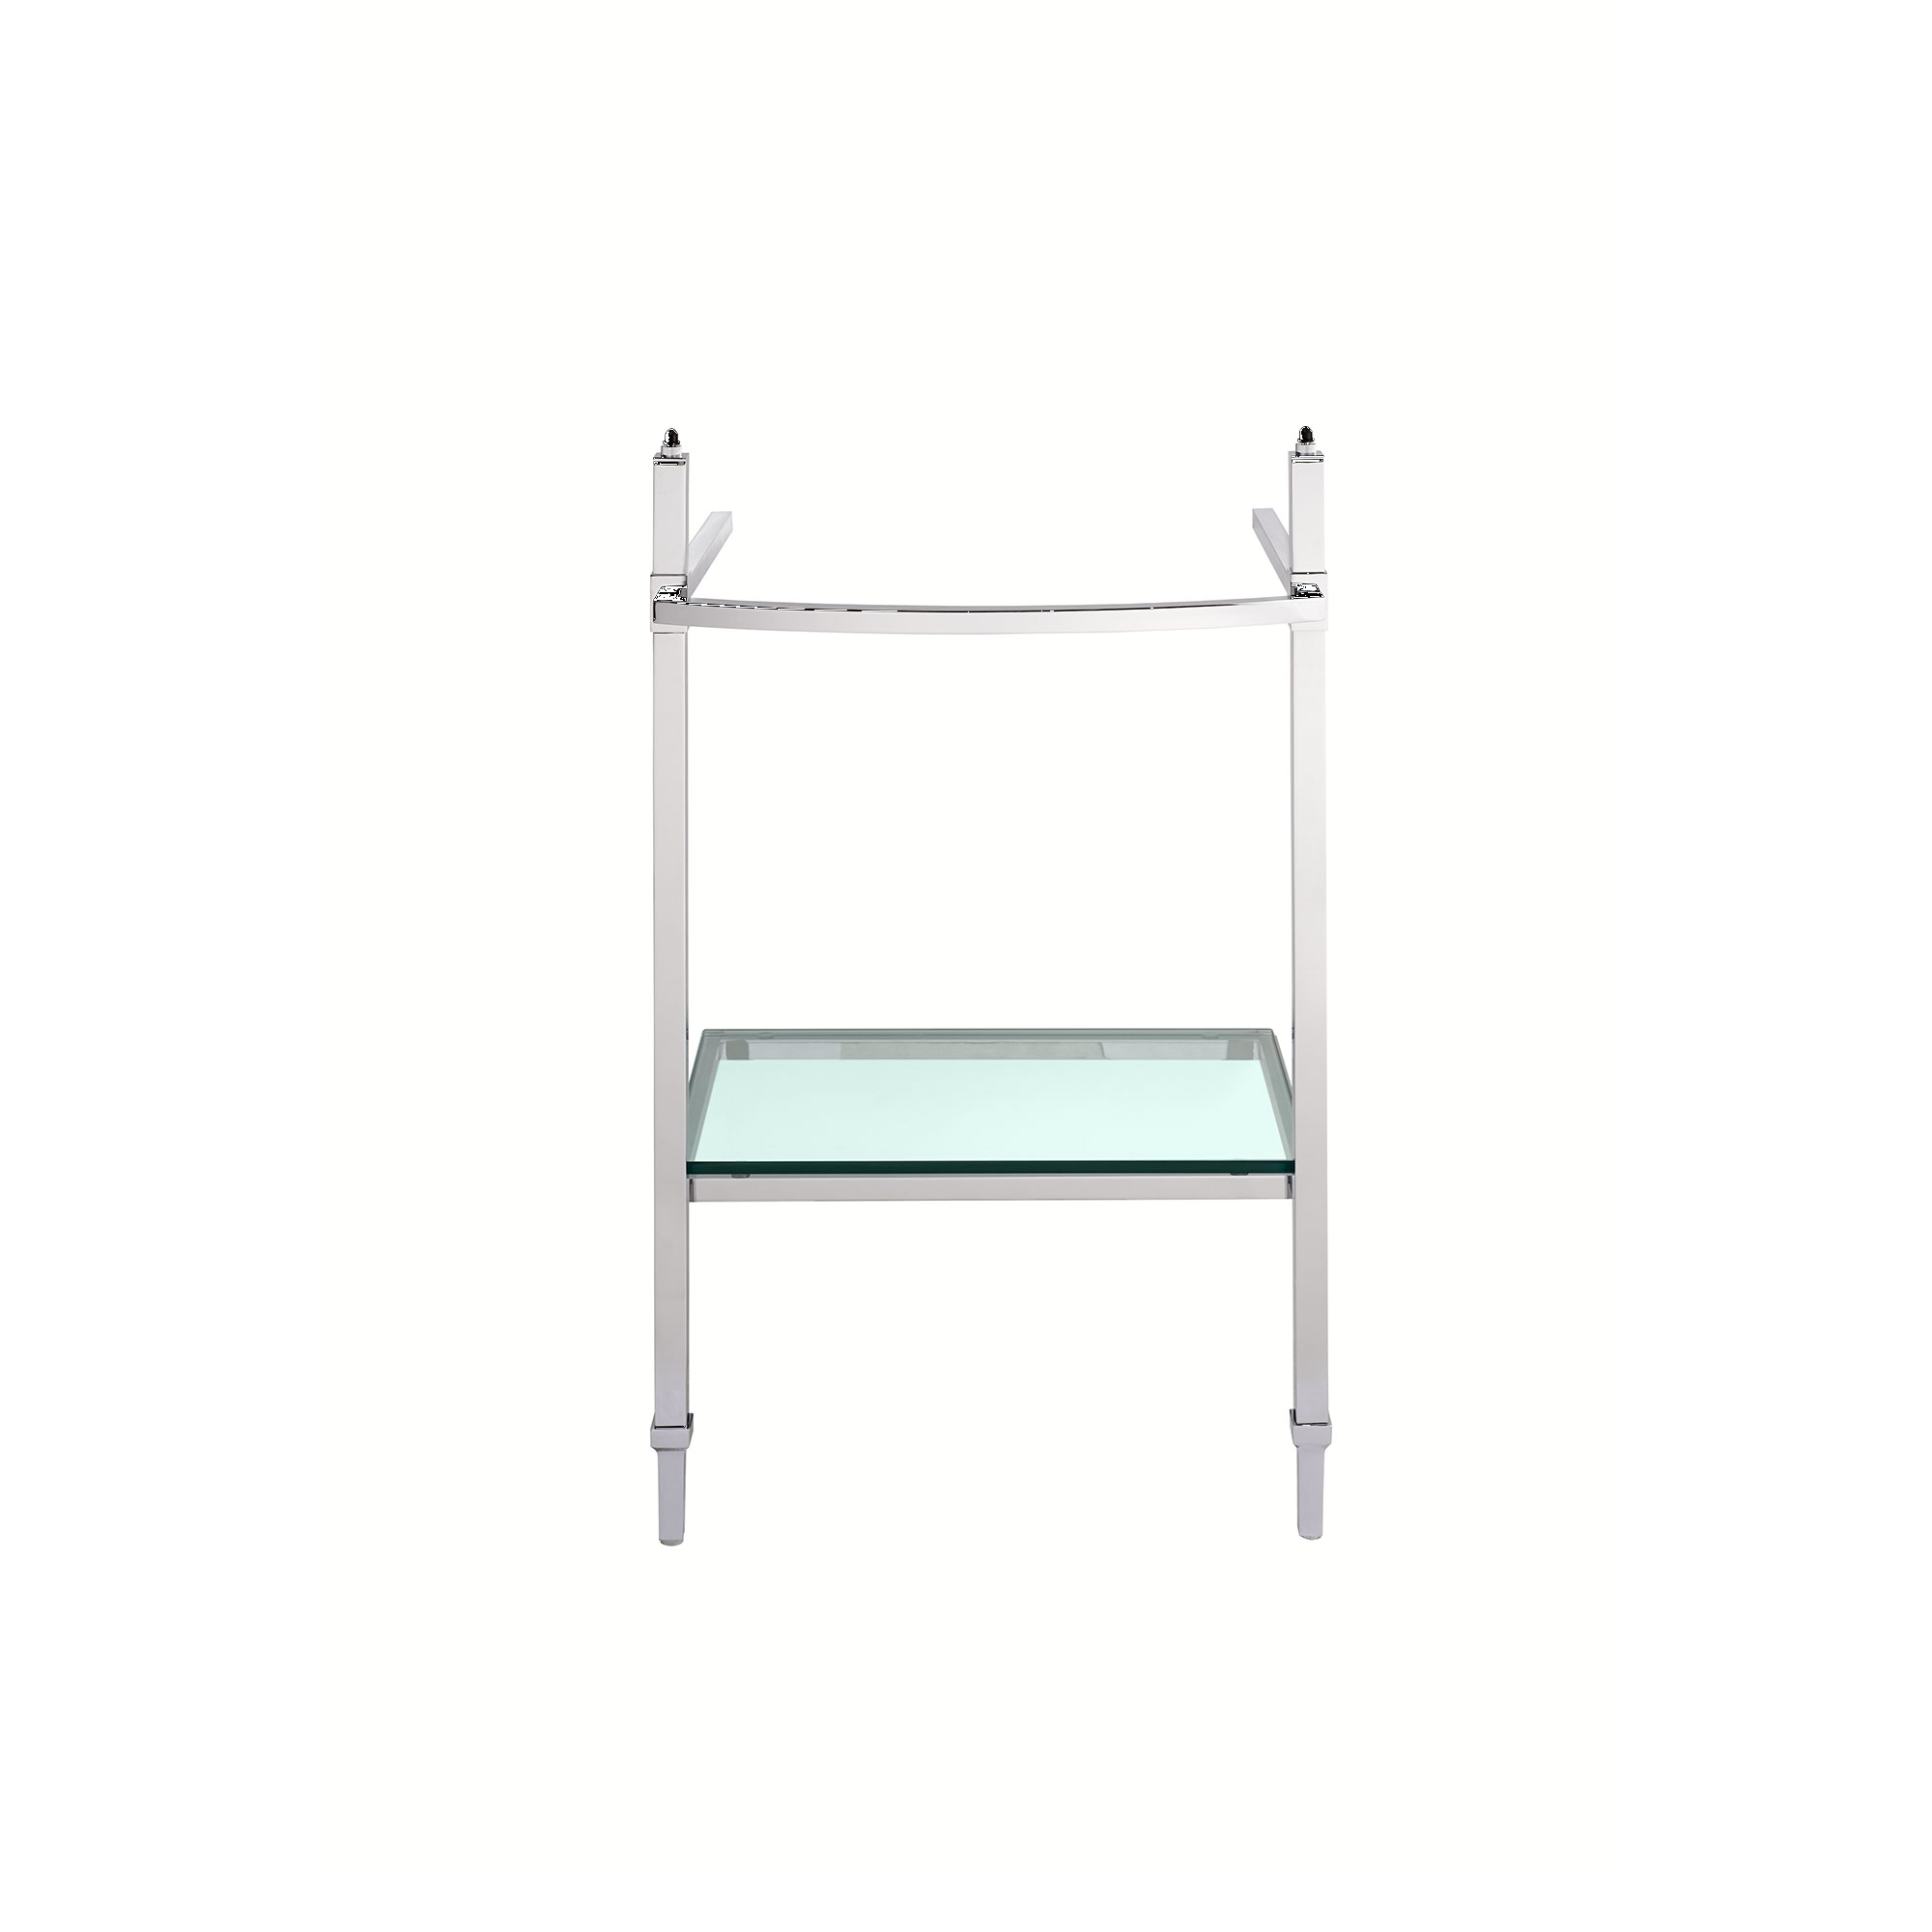 21 in. Console Legs with Glass Shelf